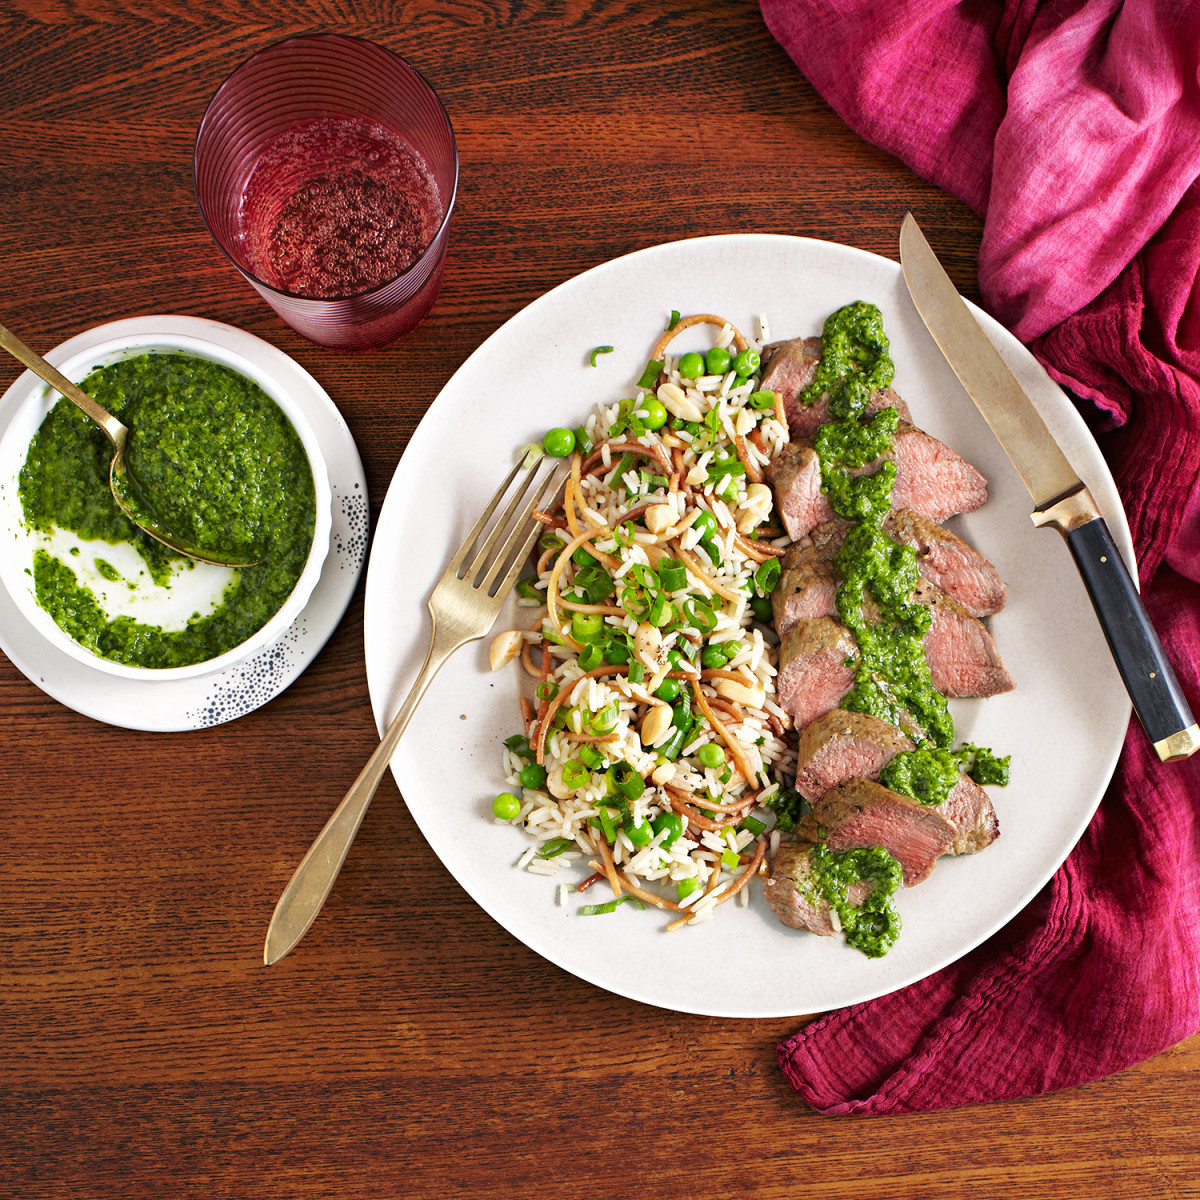 Rice Pilaf Recipe Rachael Ray
 Lamb Loin with Green Chile Mint Chimichurri and Marcona